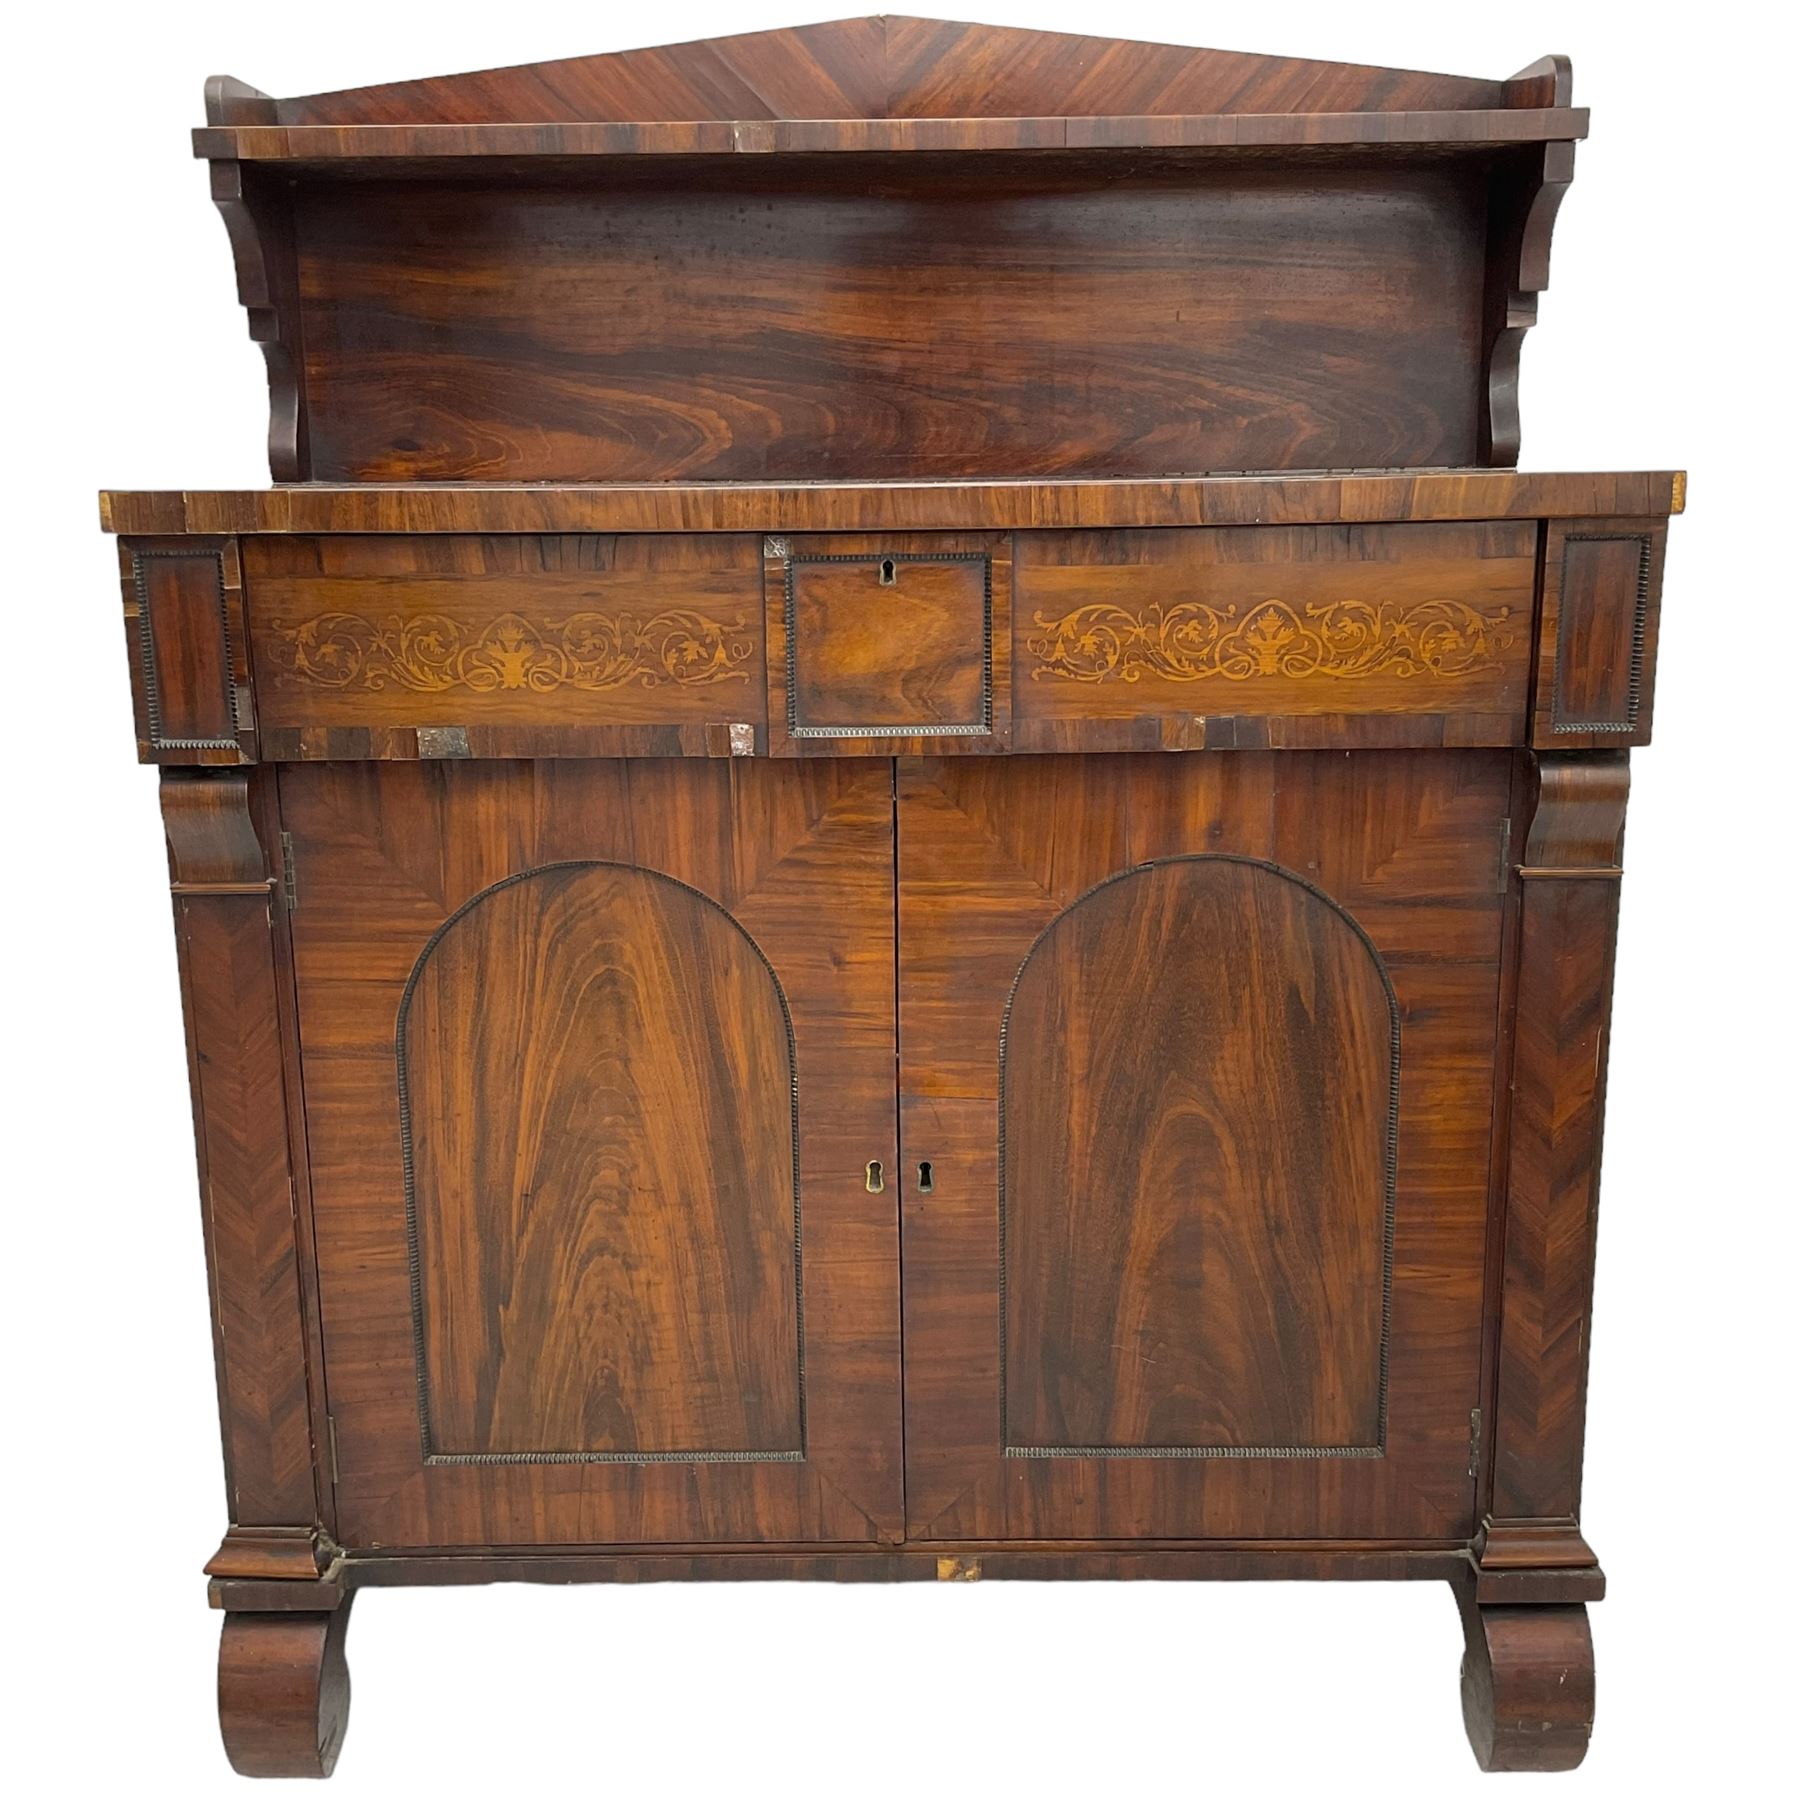 Early 19th century rosewood chiffonier